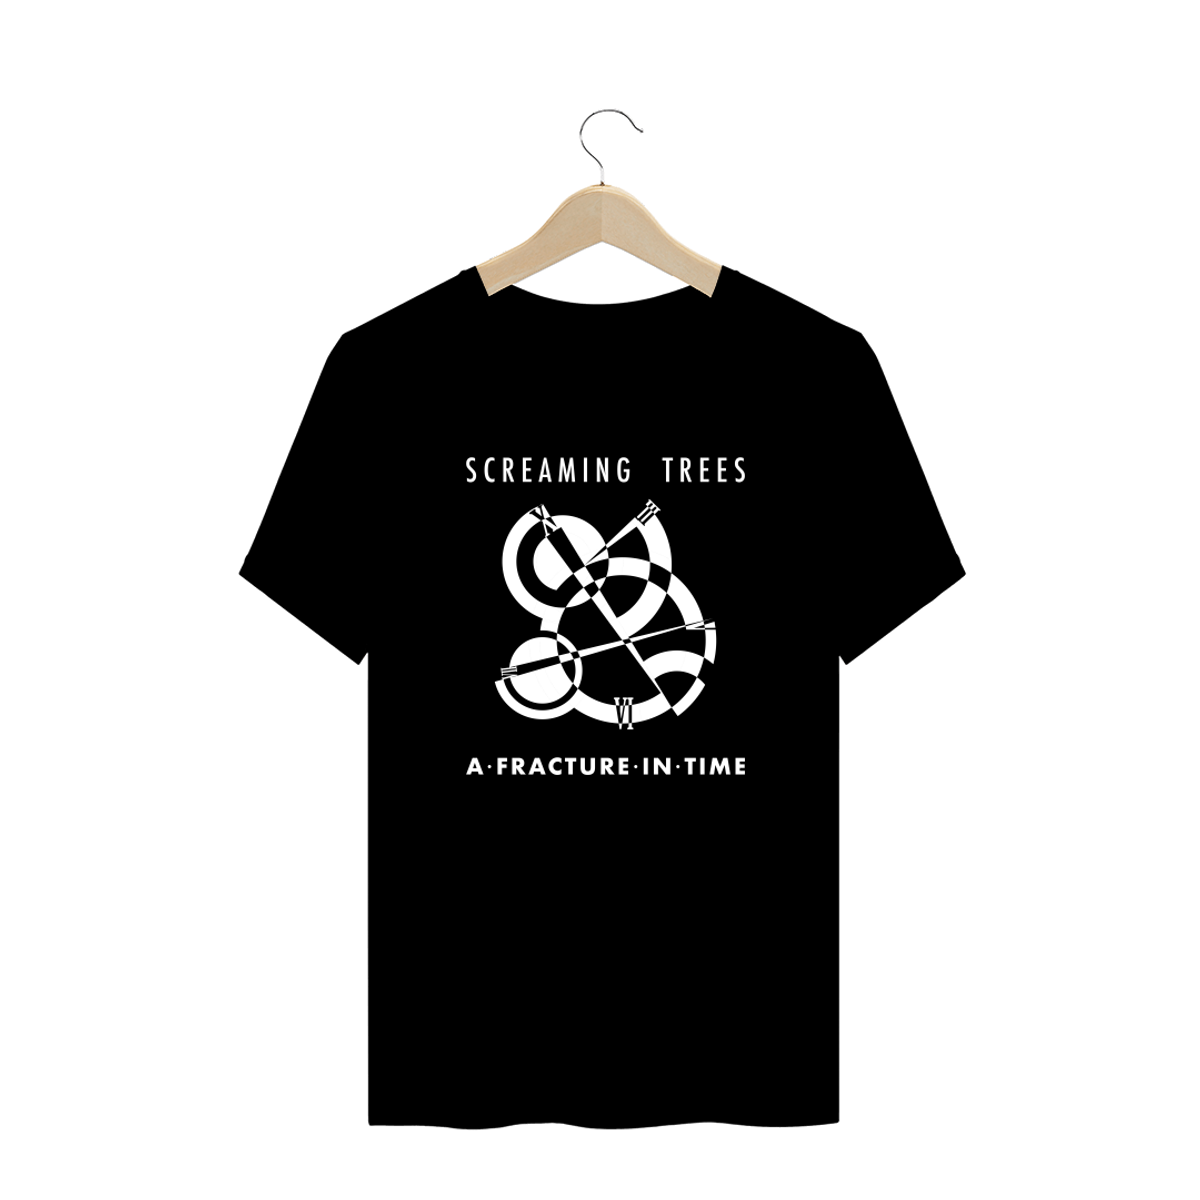 Nome do produto: CAMISETA - SCREAMING TREES - A FRACTURE IN TIME